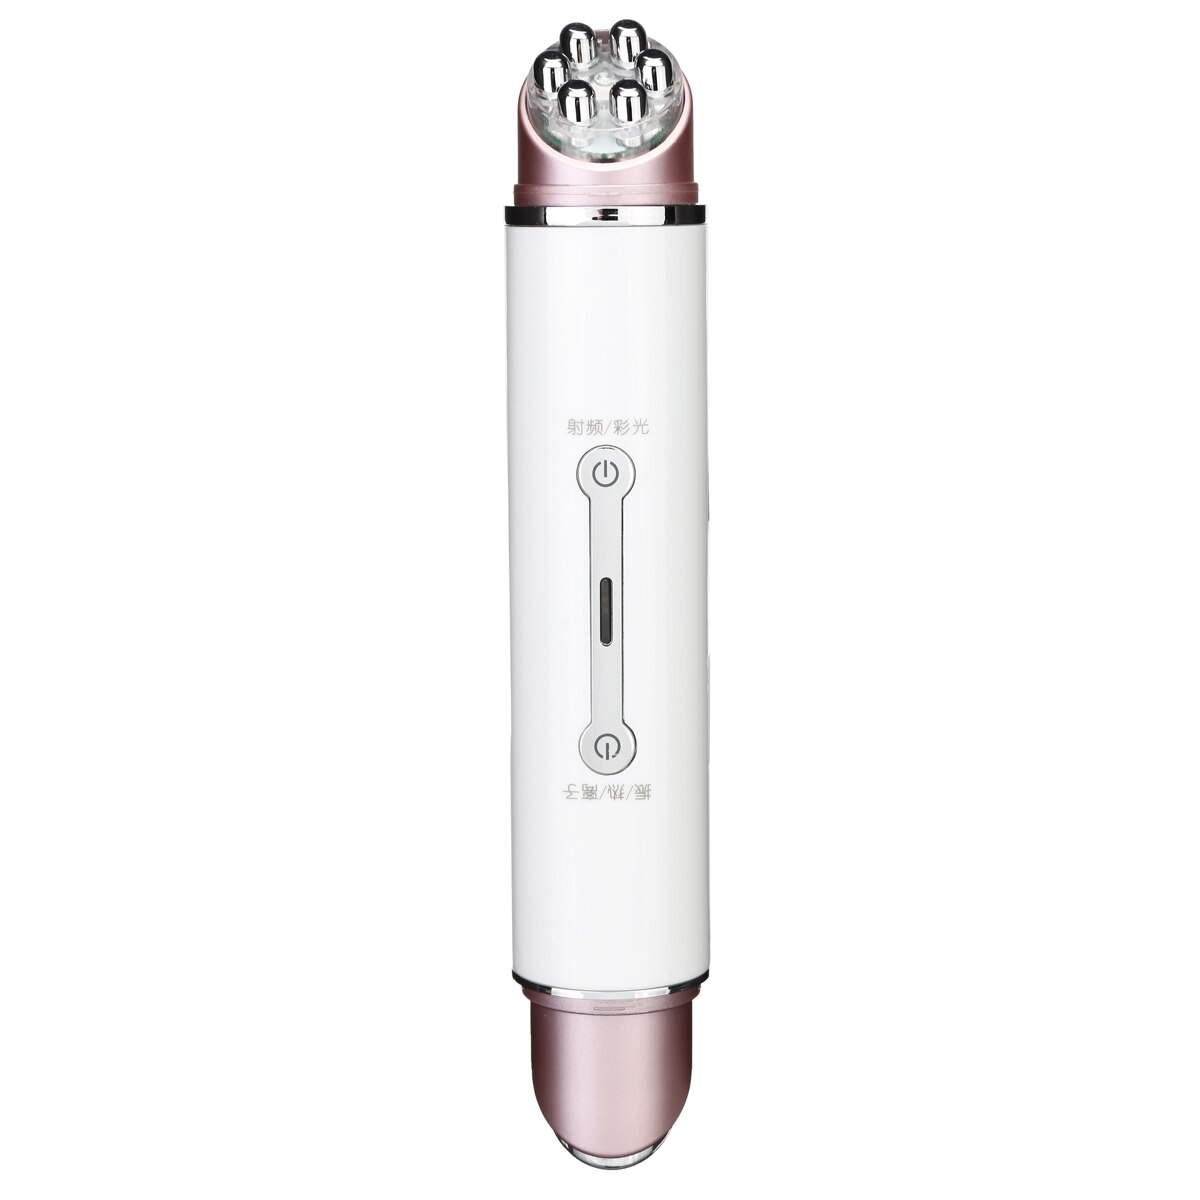 Double Head RF & EMS Radio Frequency Mesotherapy Electroporation Face Wrinkle Remove Pen Frequency Photon Face Skin Rejuvenation